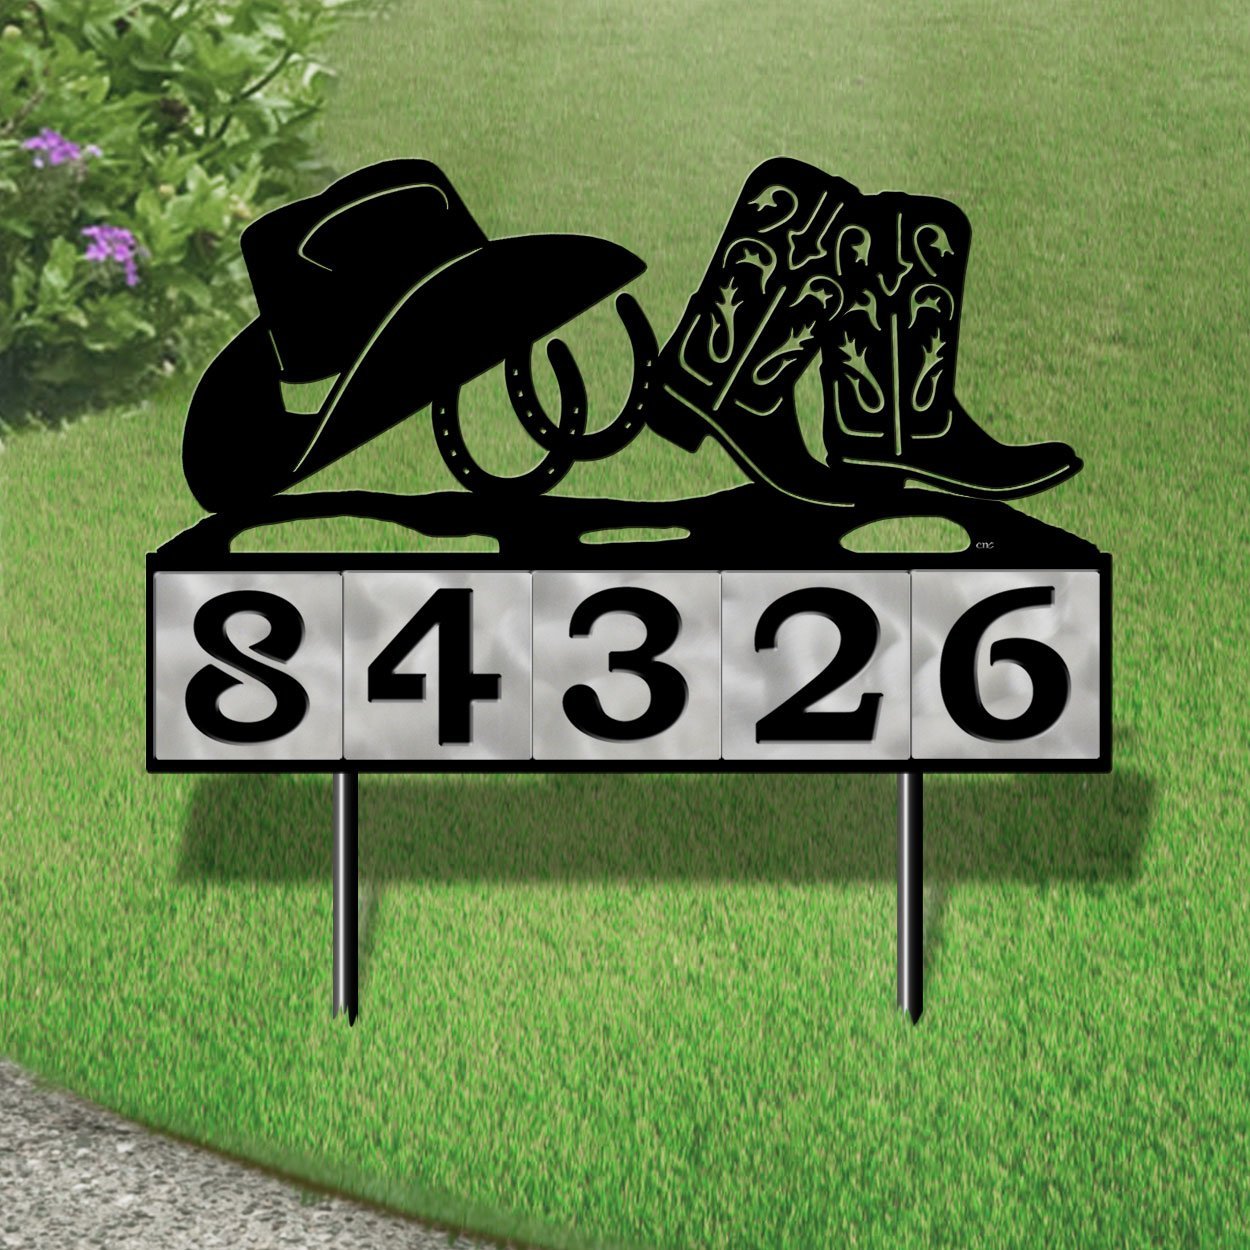 610045 - Cowboy Boots with Hat and Horseshoes Design 5-Digit Horizontal 6-inch Tile Outdoor House Numbers Yard Sign